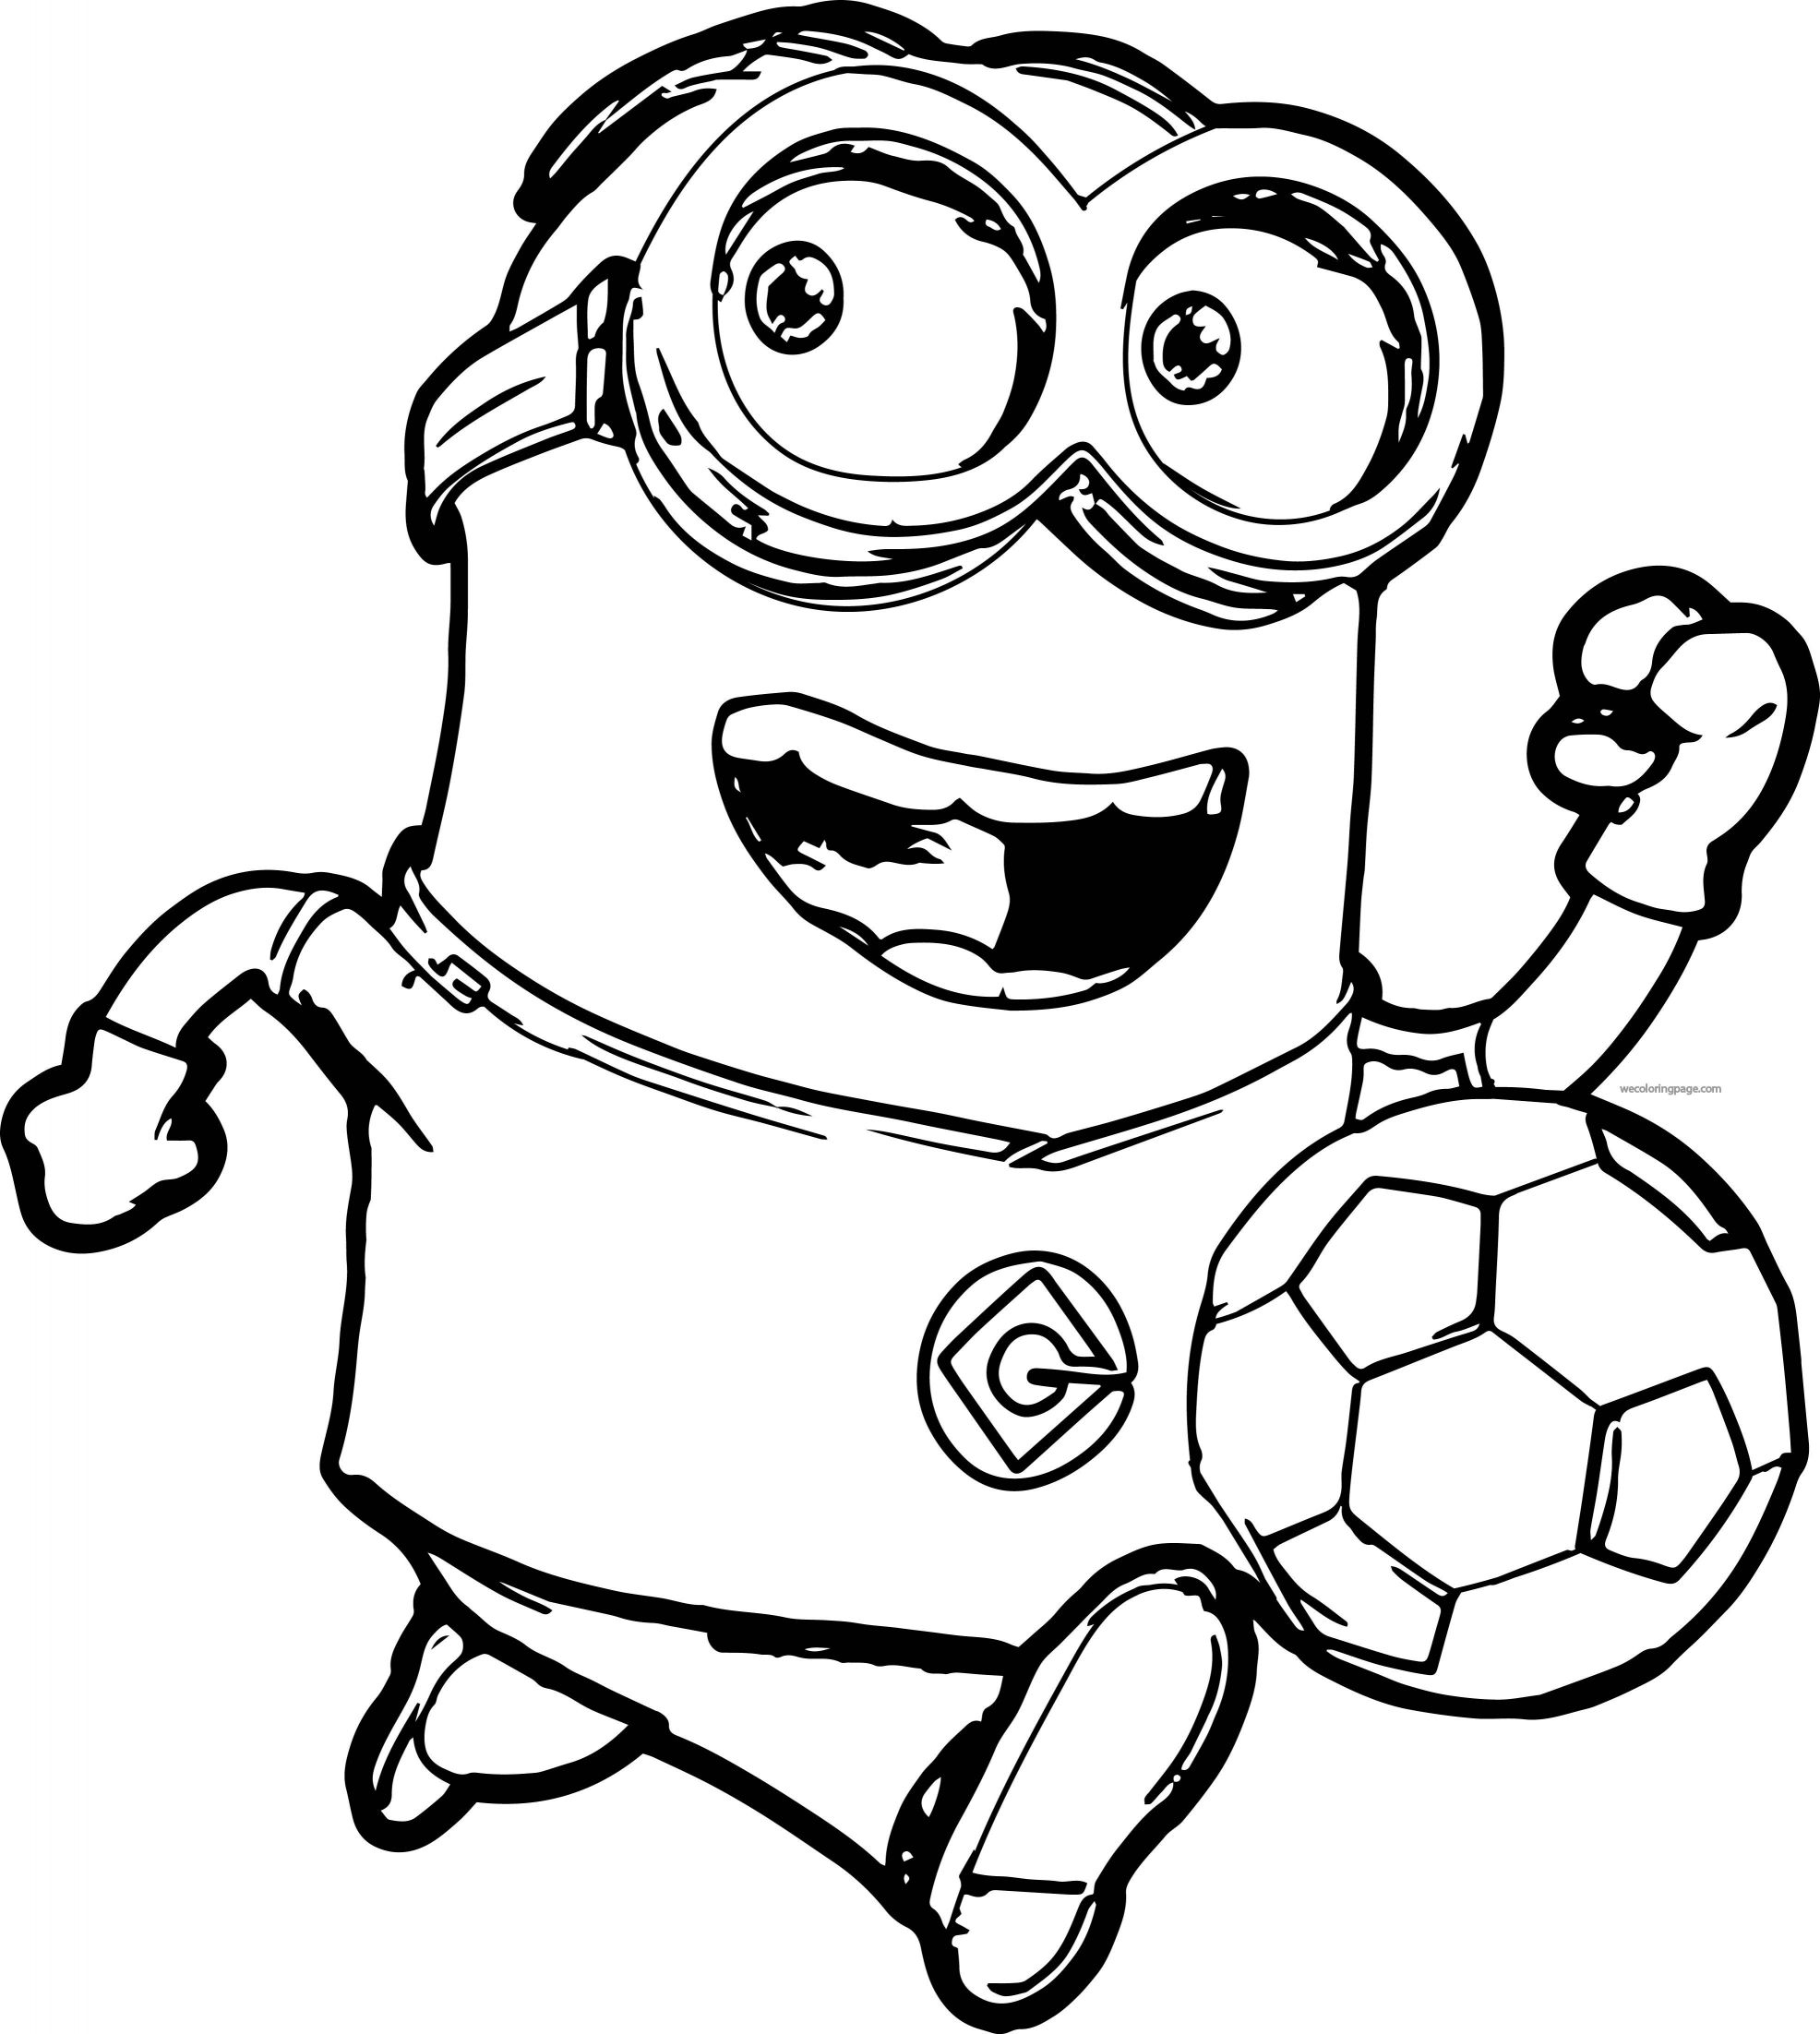 Coloring Pages For Kids Minions at GetColorings.com | Free printable